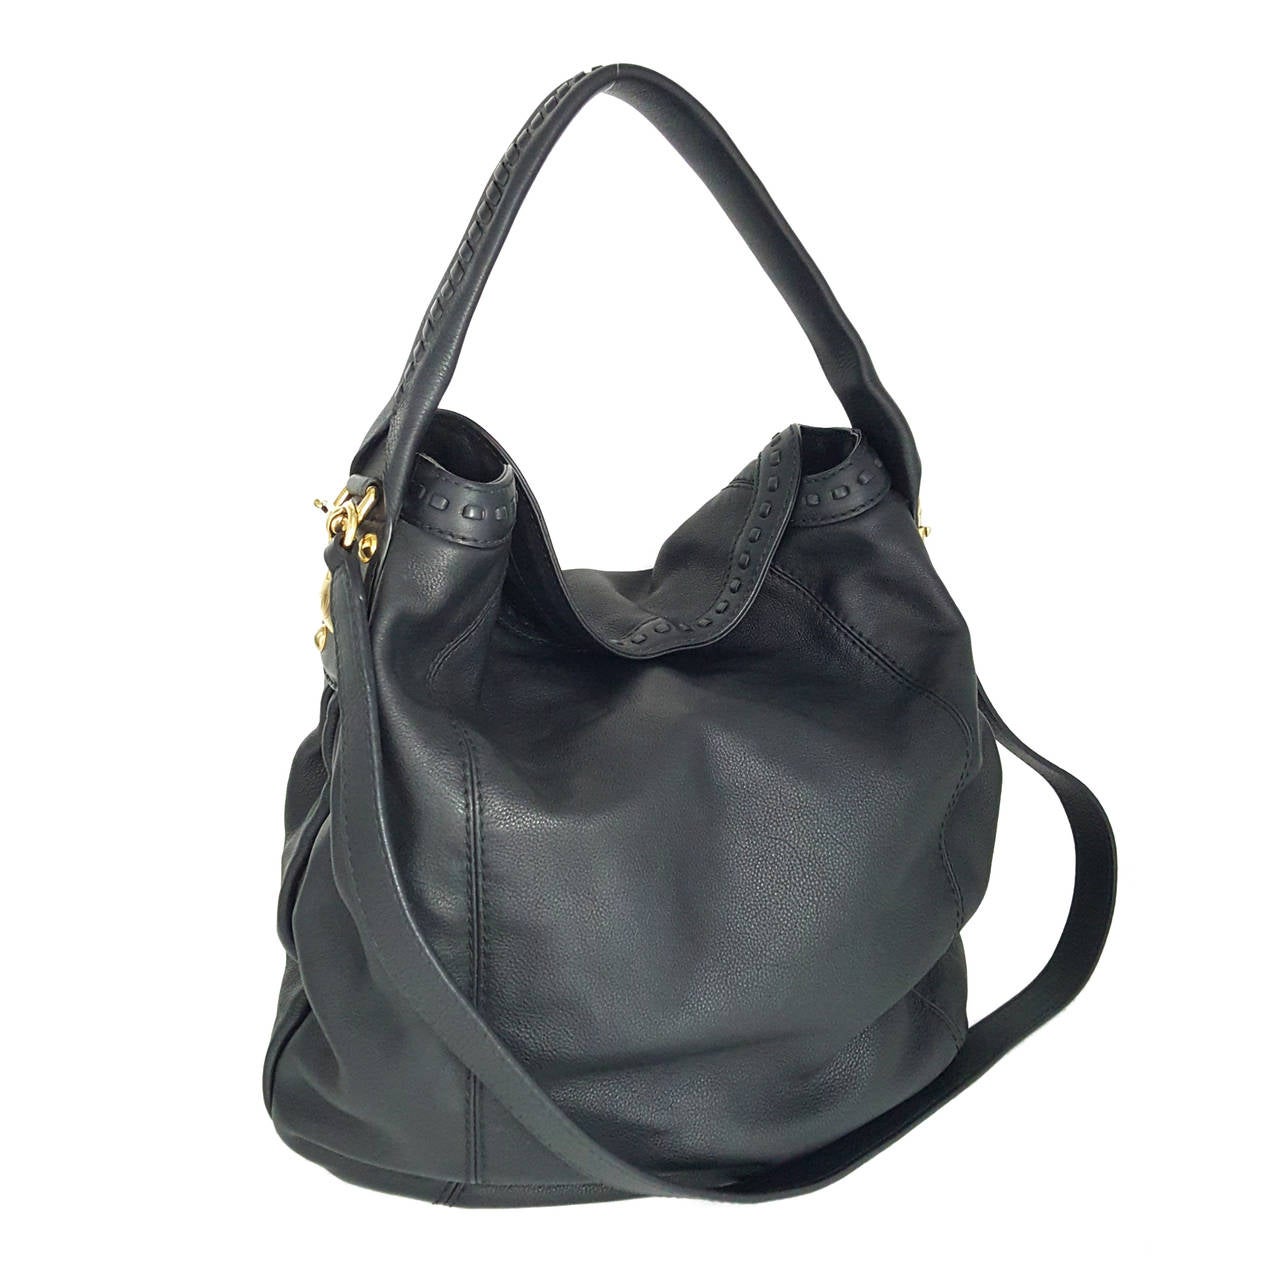 Gucci Black Leather "Sunset" Hobo Bag With Gold Hardware.  New For Sale